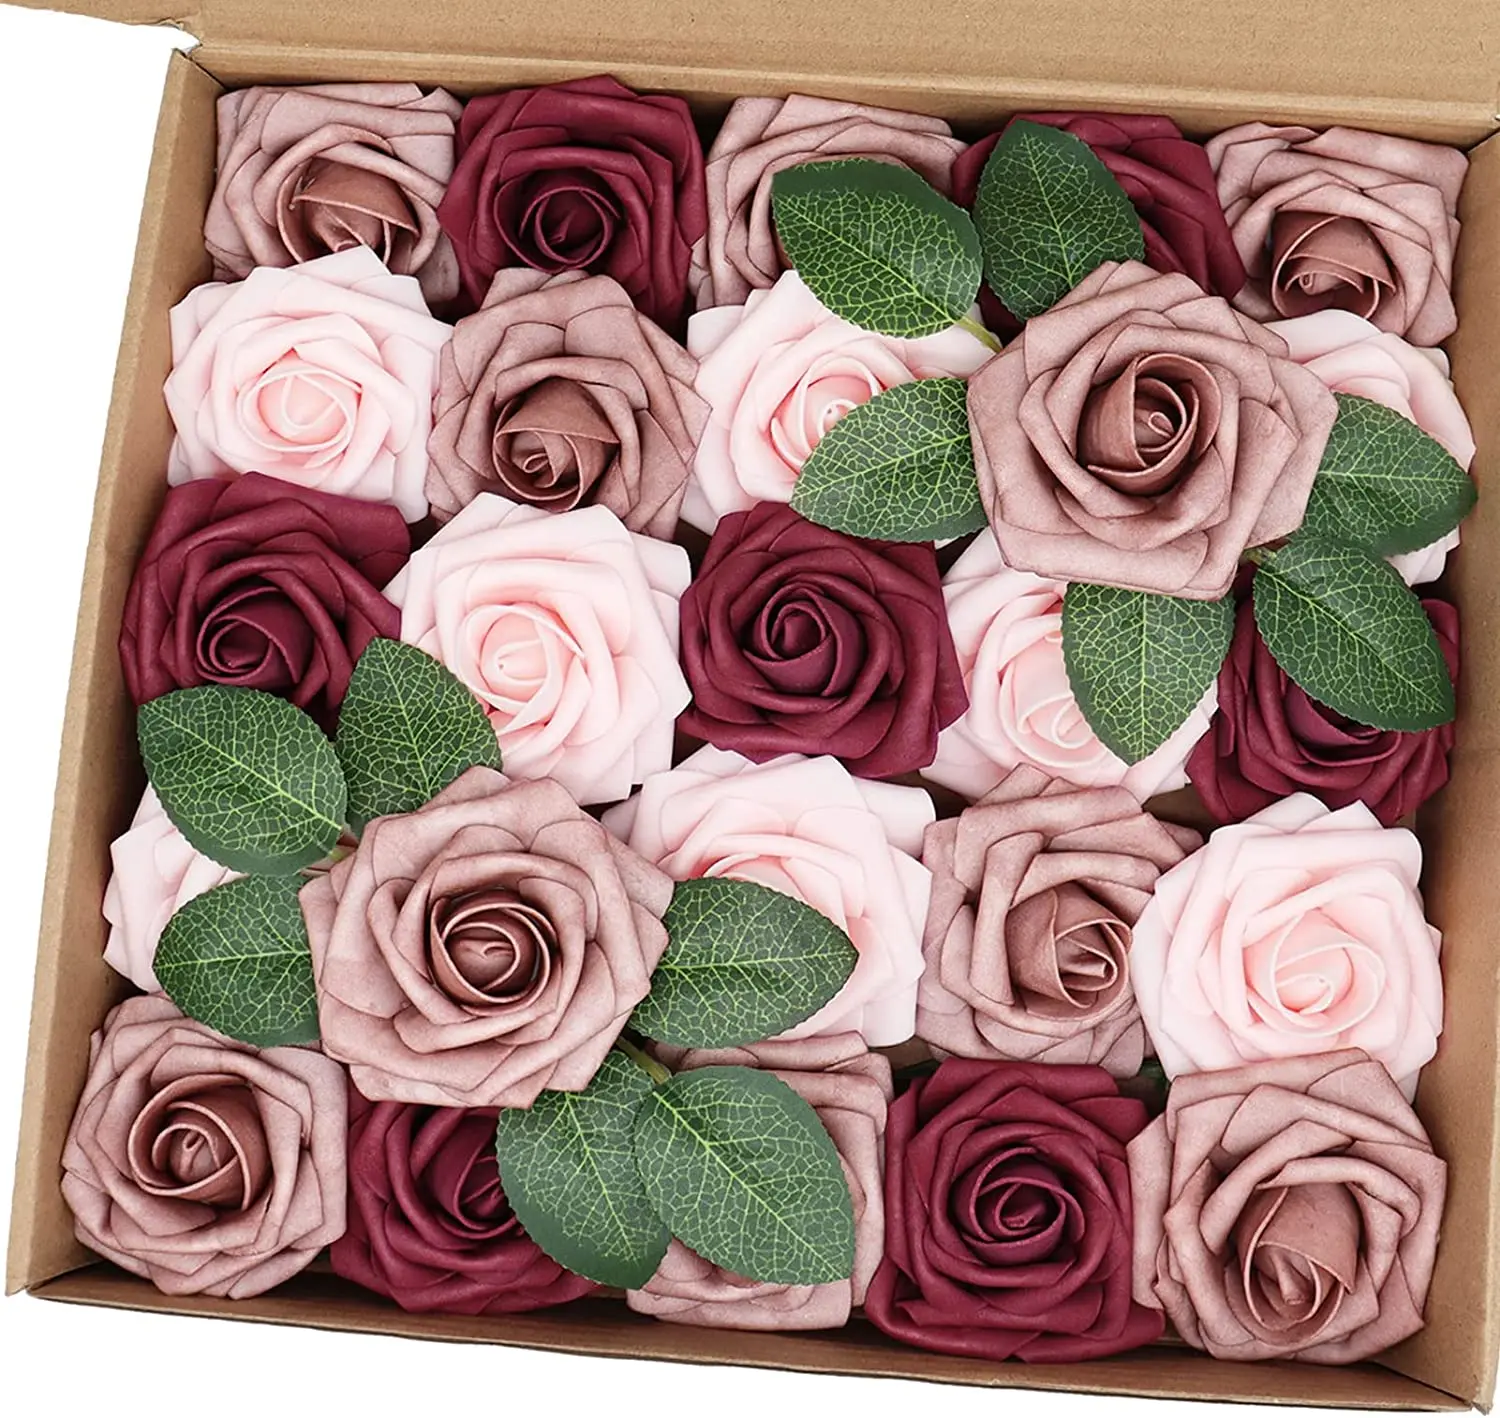 

Mefier Home Artificial Flowers 25/50PCS Real Looking Mixed Colors Dusty Rose Fake Roses with Stem for Wedding Party Decorations